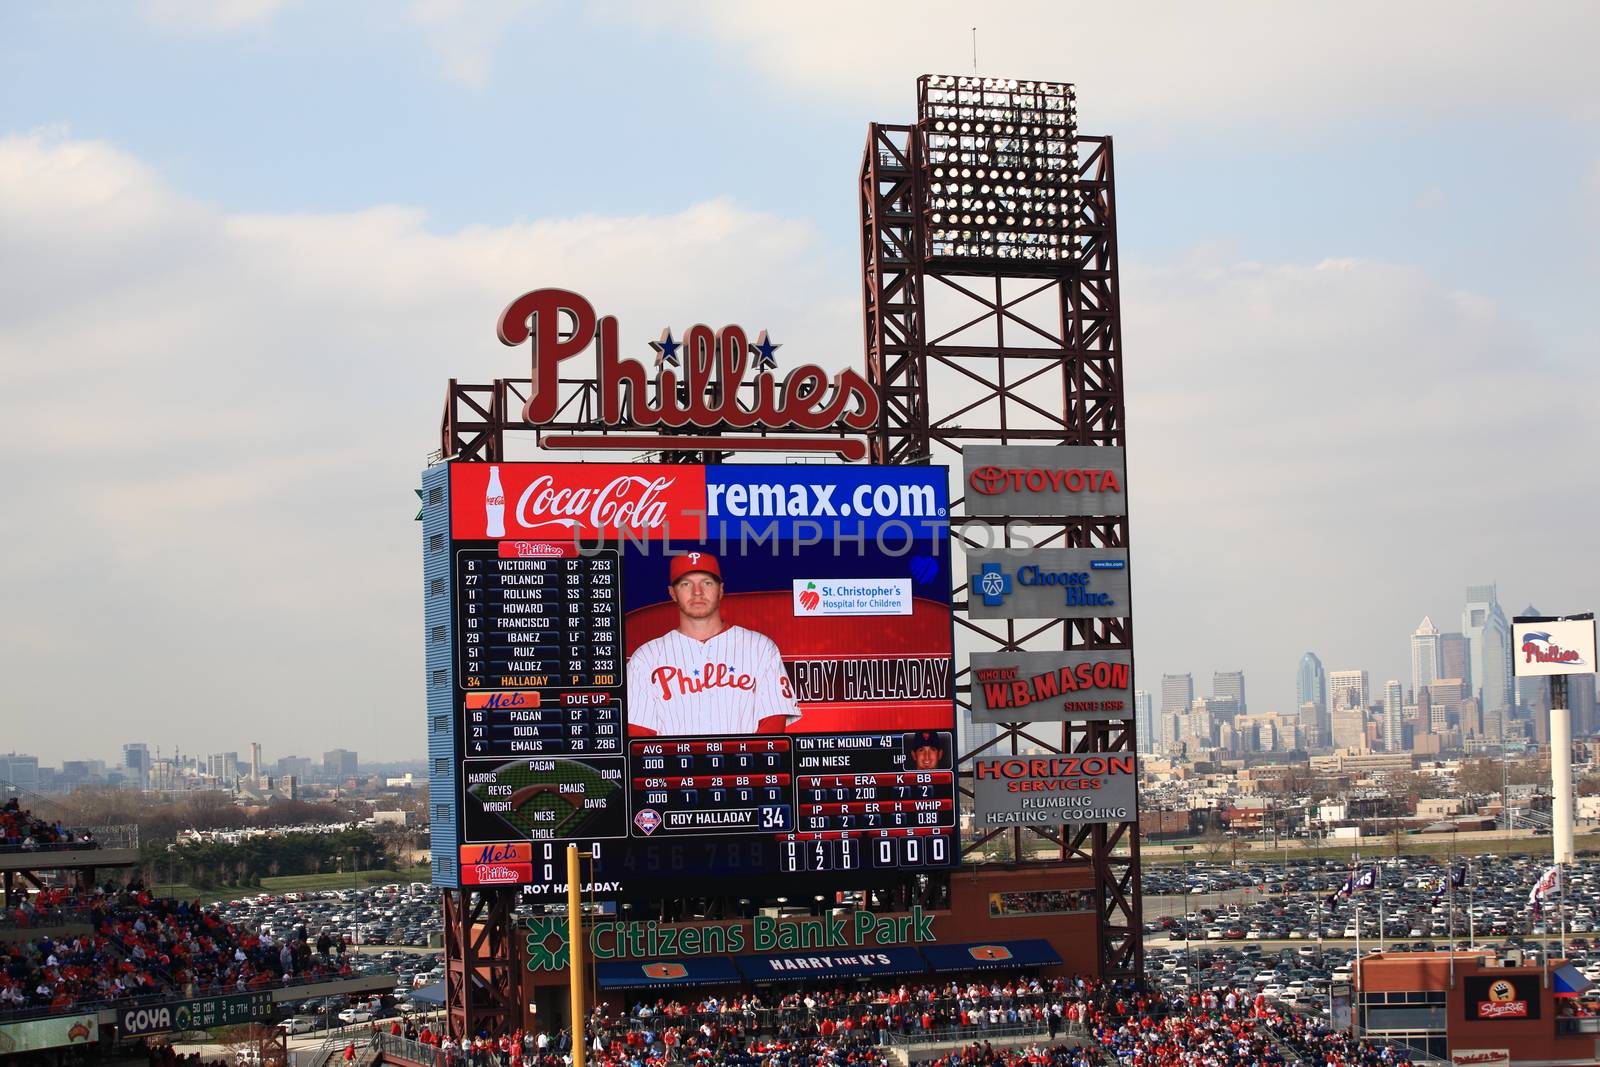 Star pitcher Roy Halladay on the scoreboard at Citizens Bank Park, home of the Philadelphia Phillies. 







Citizen Bank Scoreboard during a Philadelphia Phillies baseball game.